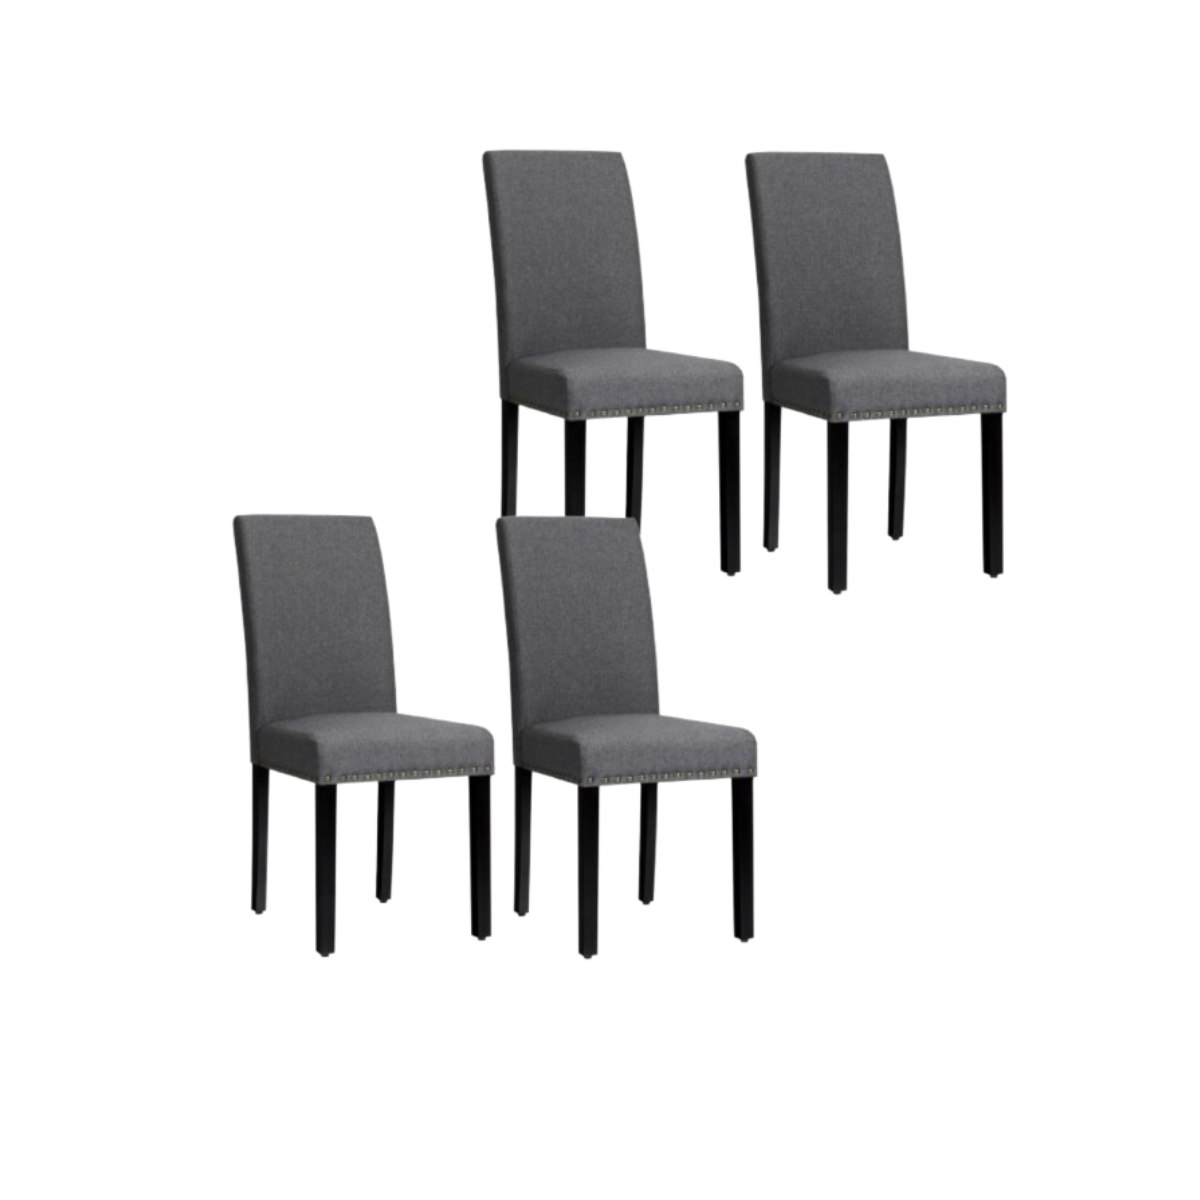 Photos - Chair Goplus Costway Fabric Dining  with Nailhead Trim  - Dining(Set of 4)